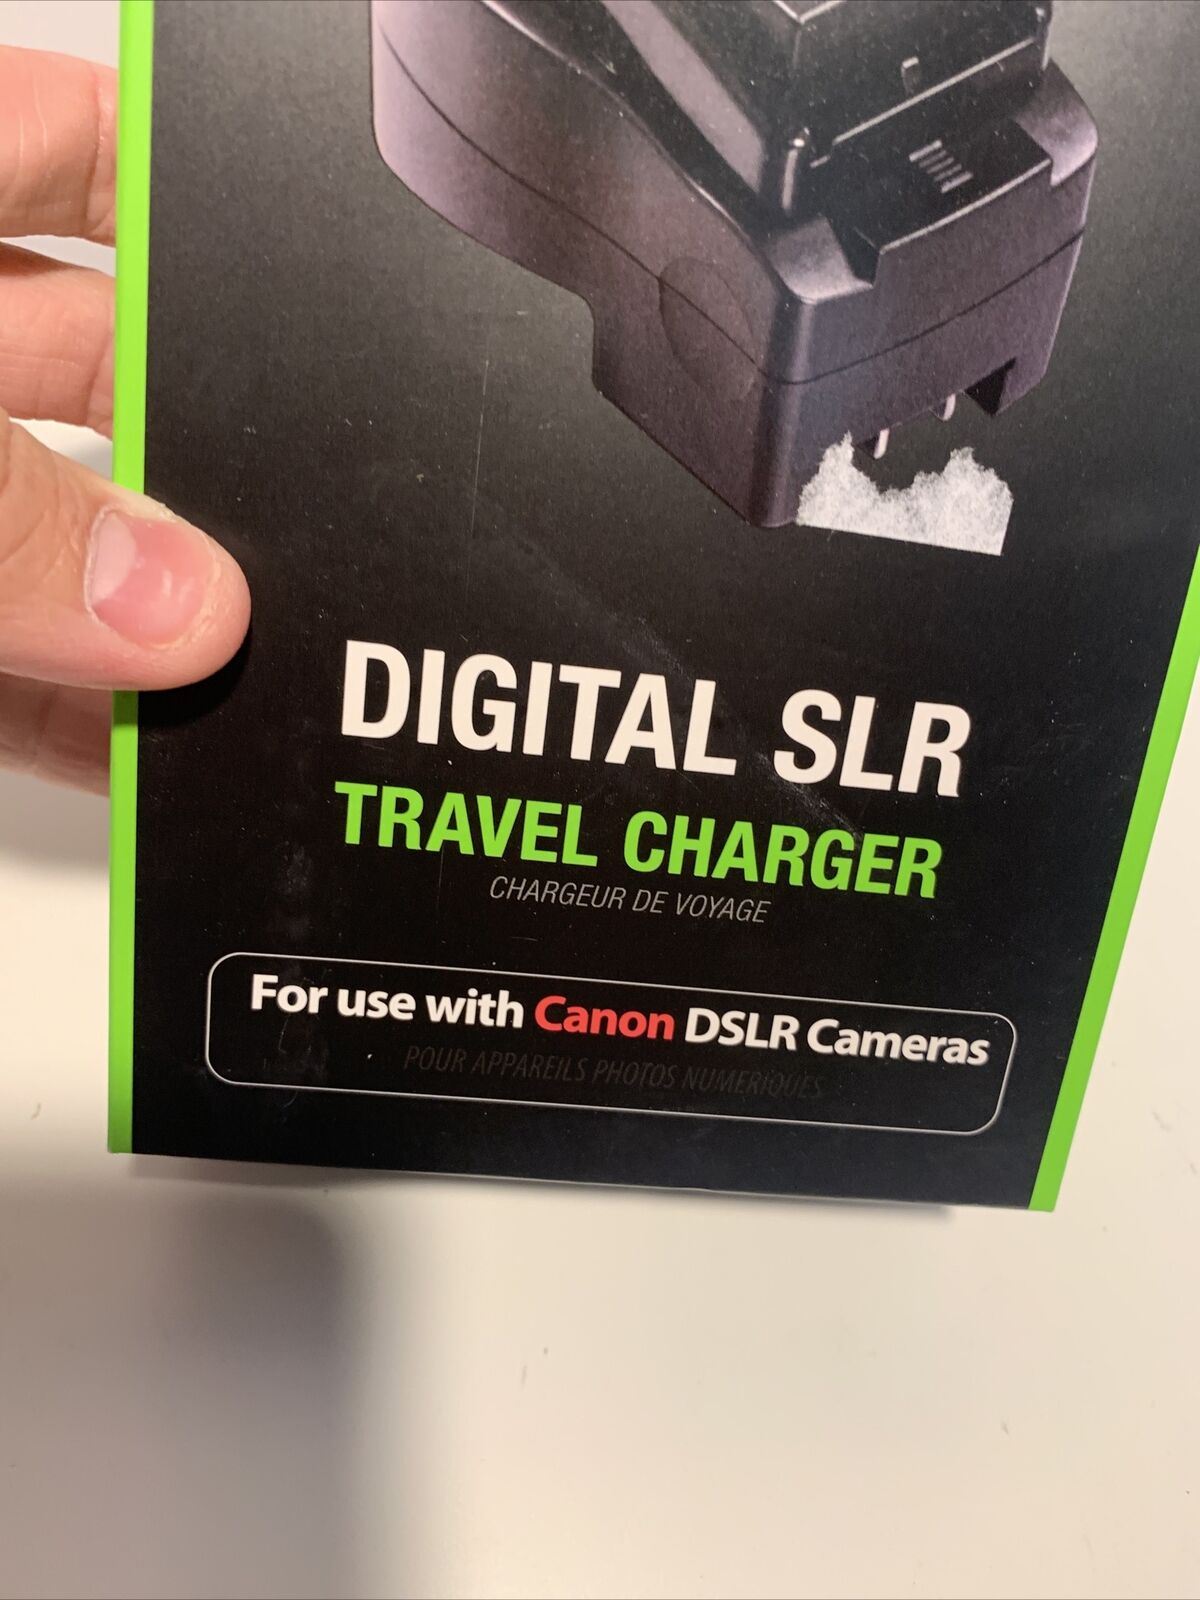 Re-Fuel Digital SLR Travel Charger for Use with Canon DSLR Cameras